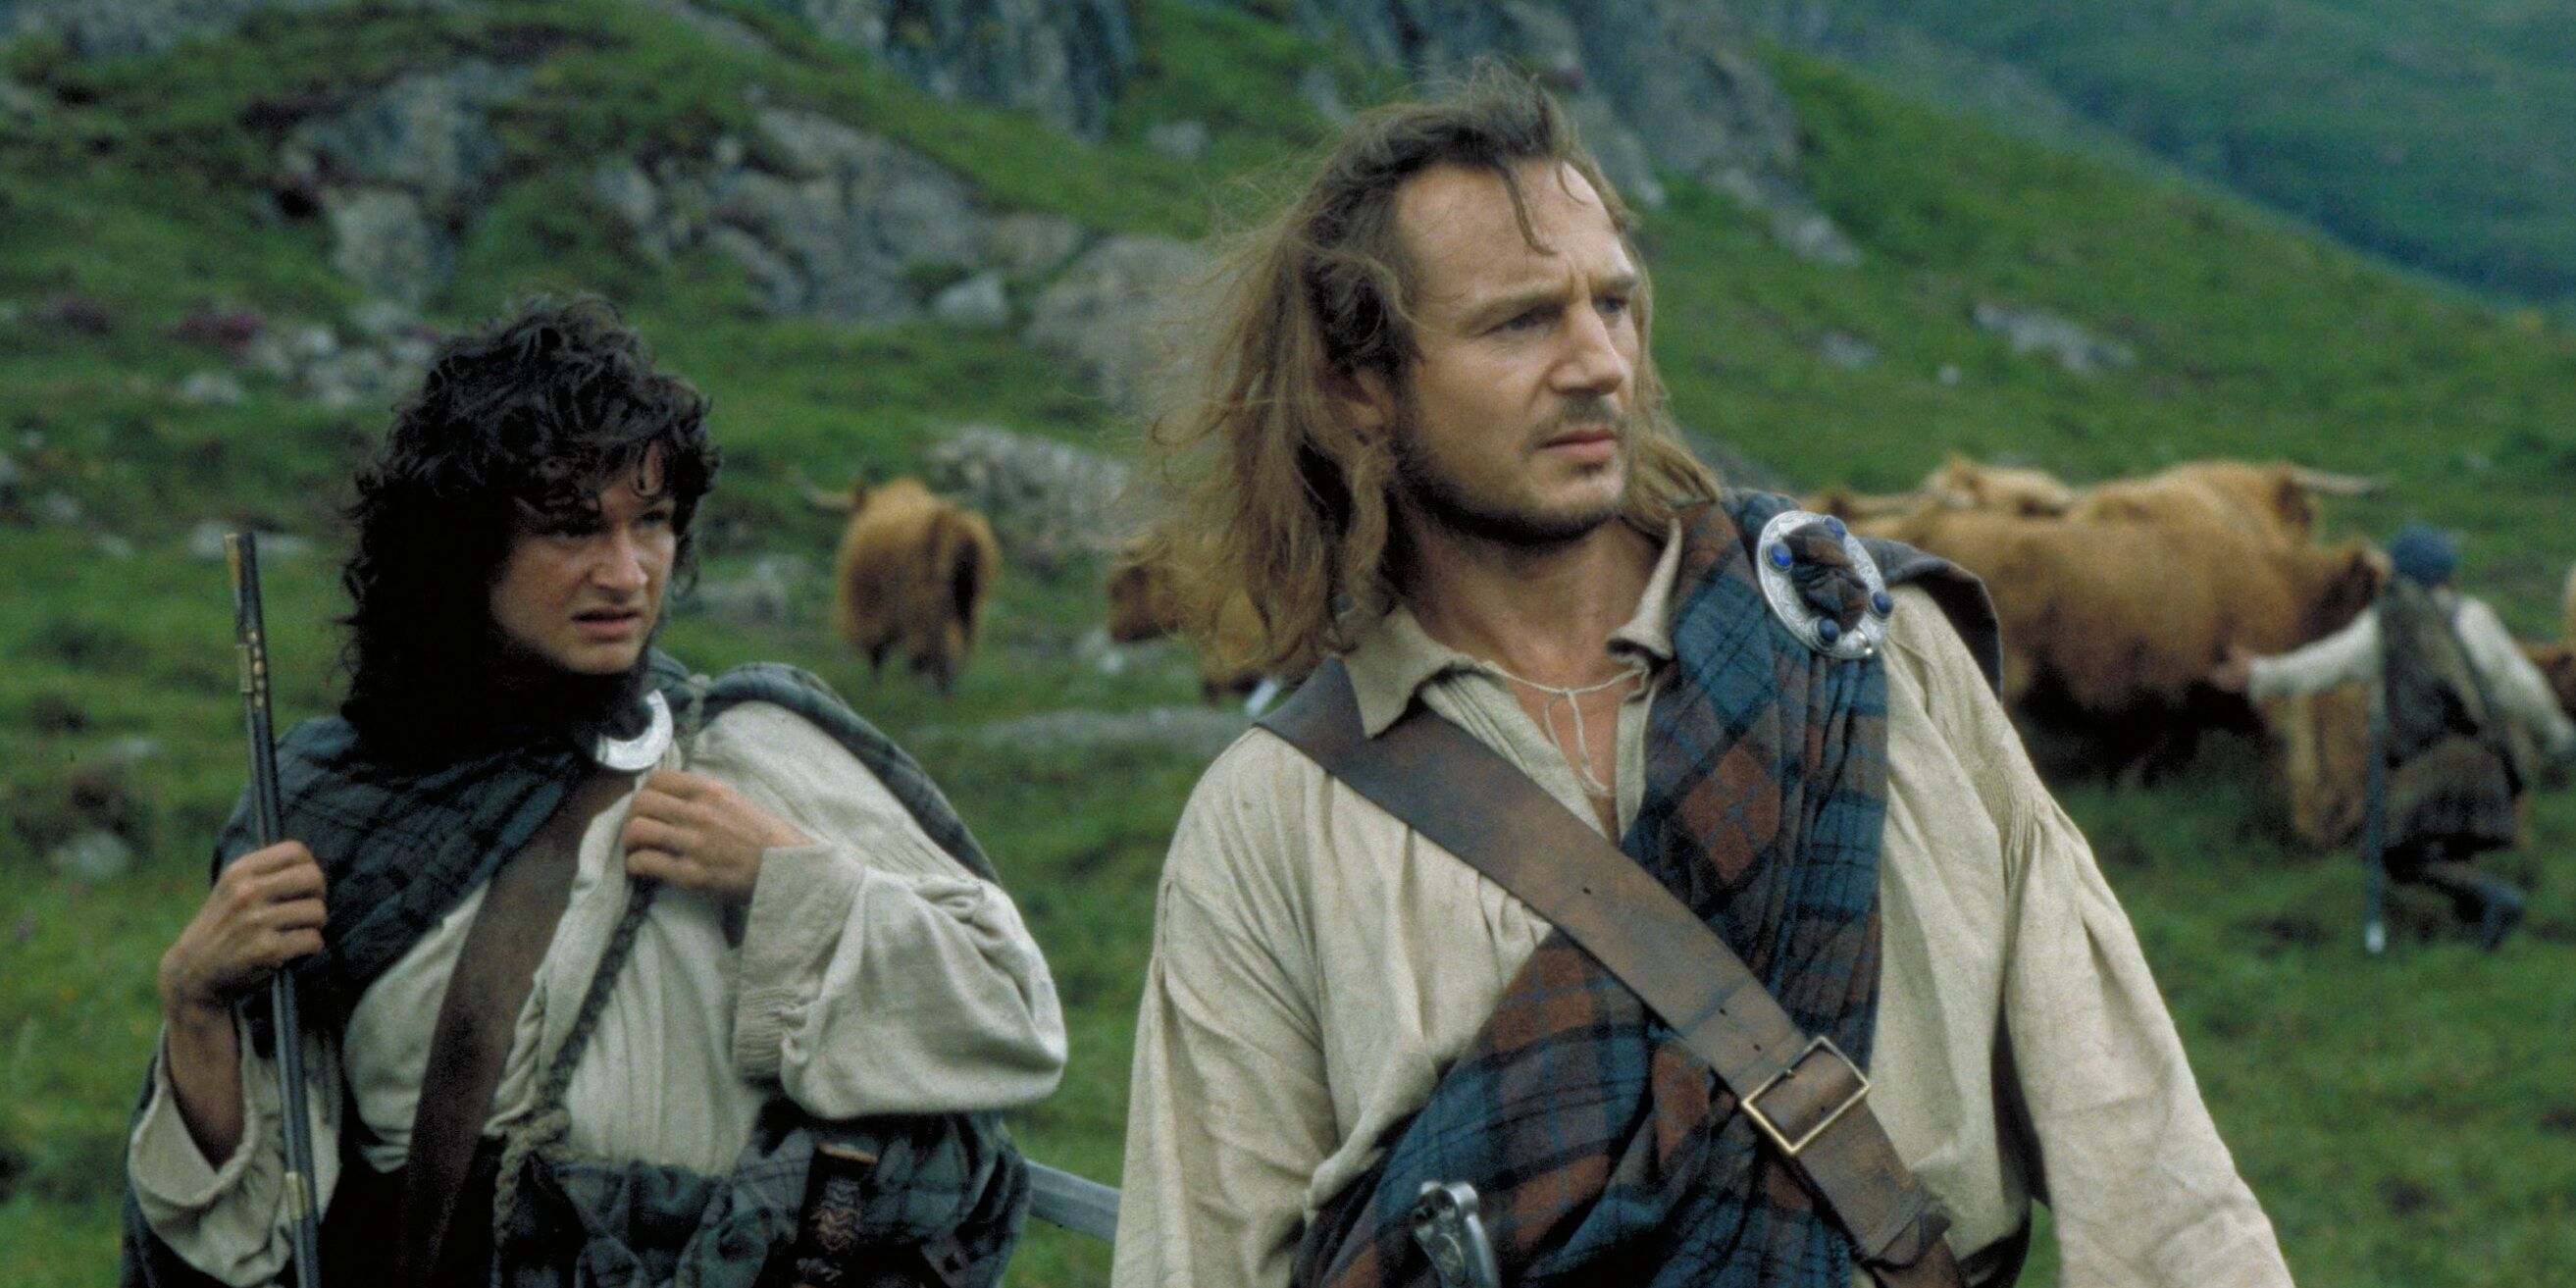 A still from the film Rob Roy featuring Liam Neeson and Brian McCardie